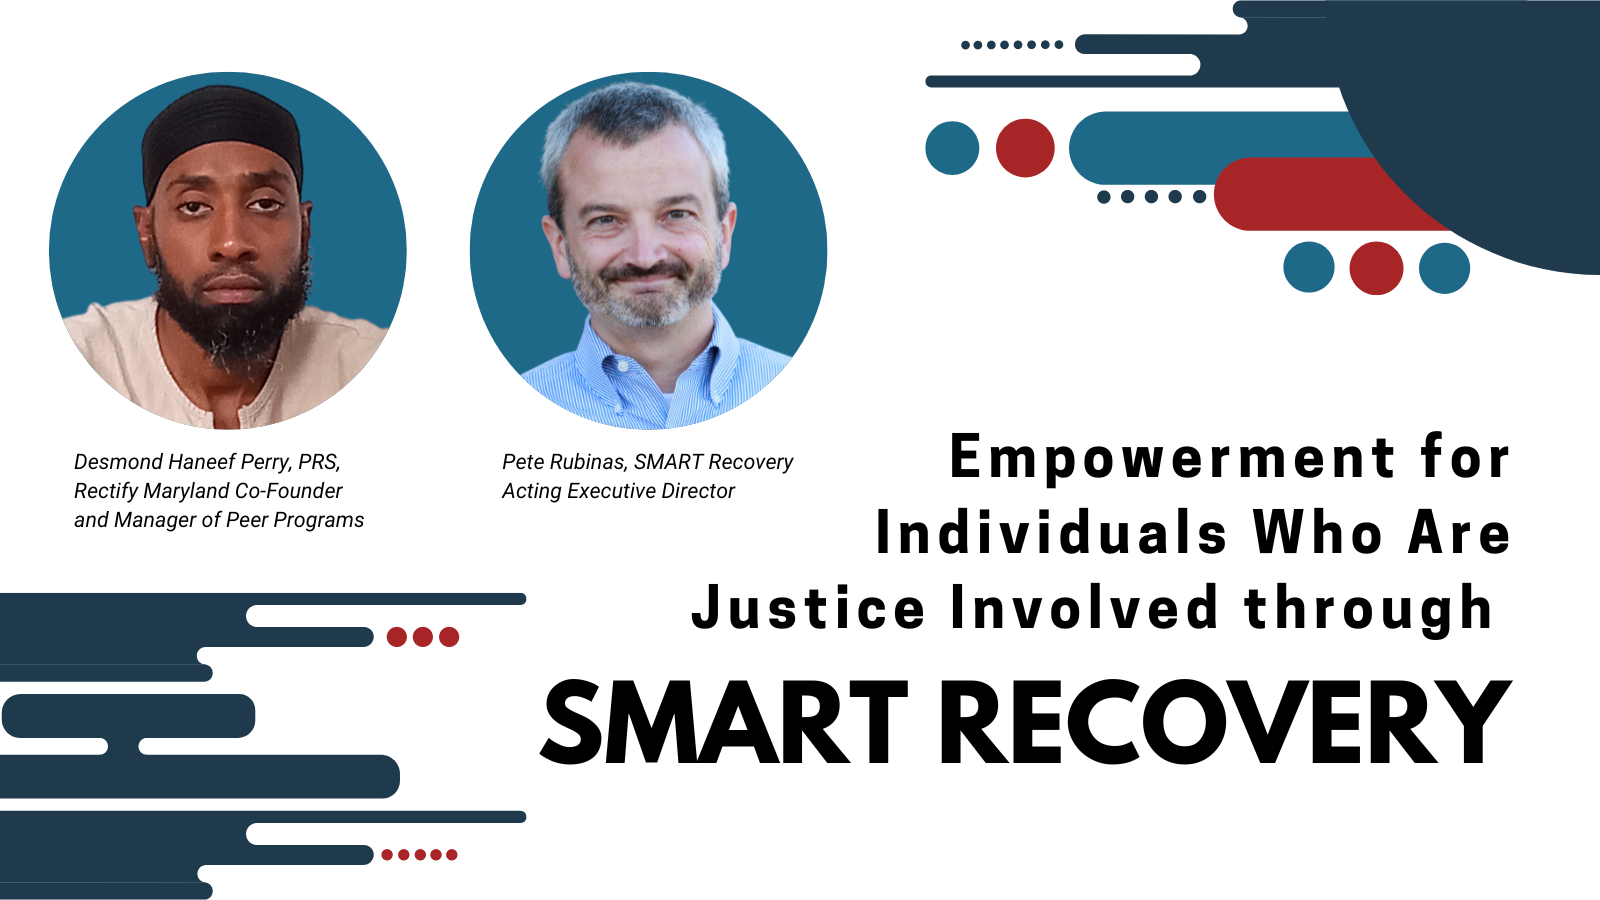 SMART Recovery - The 519